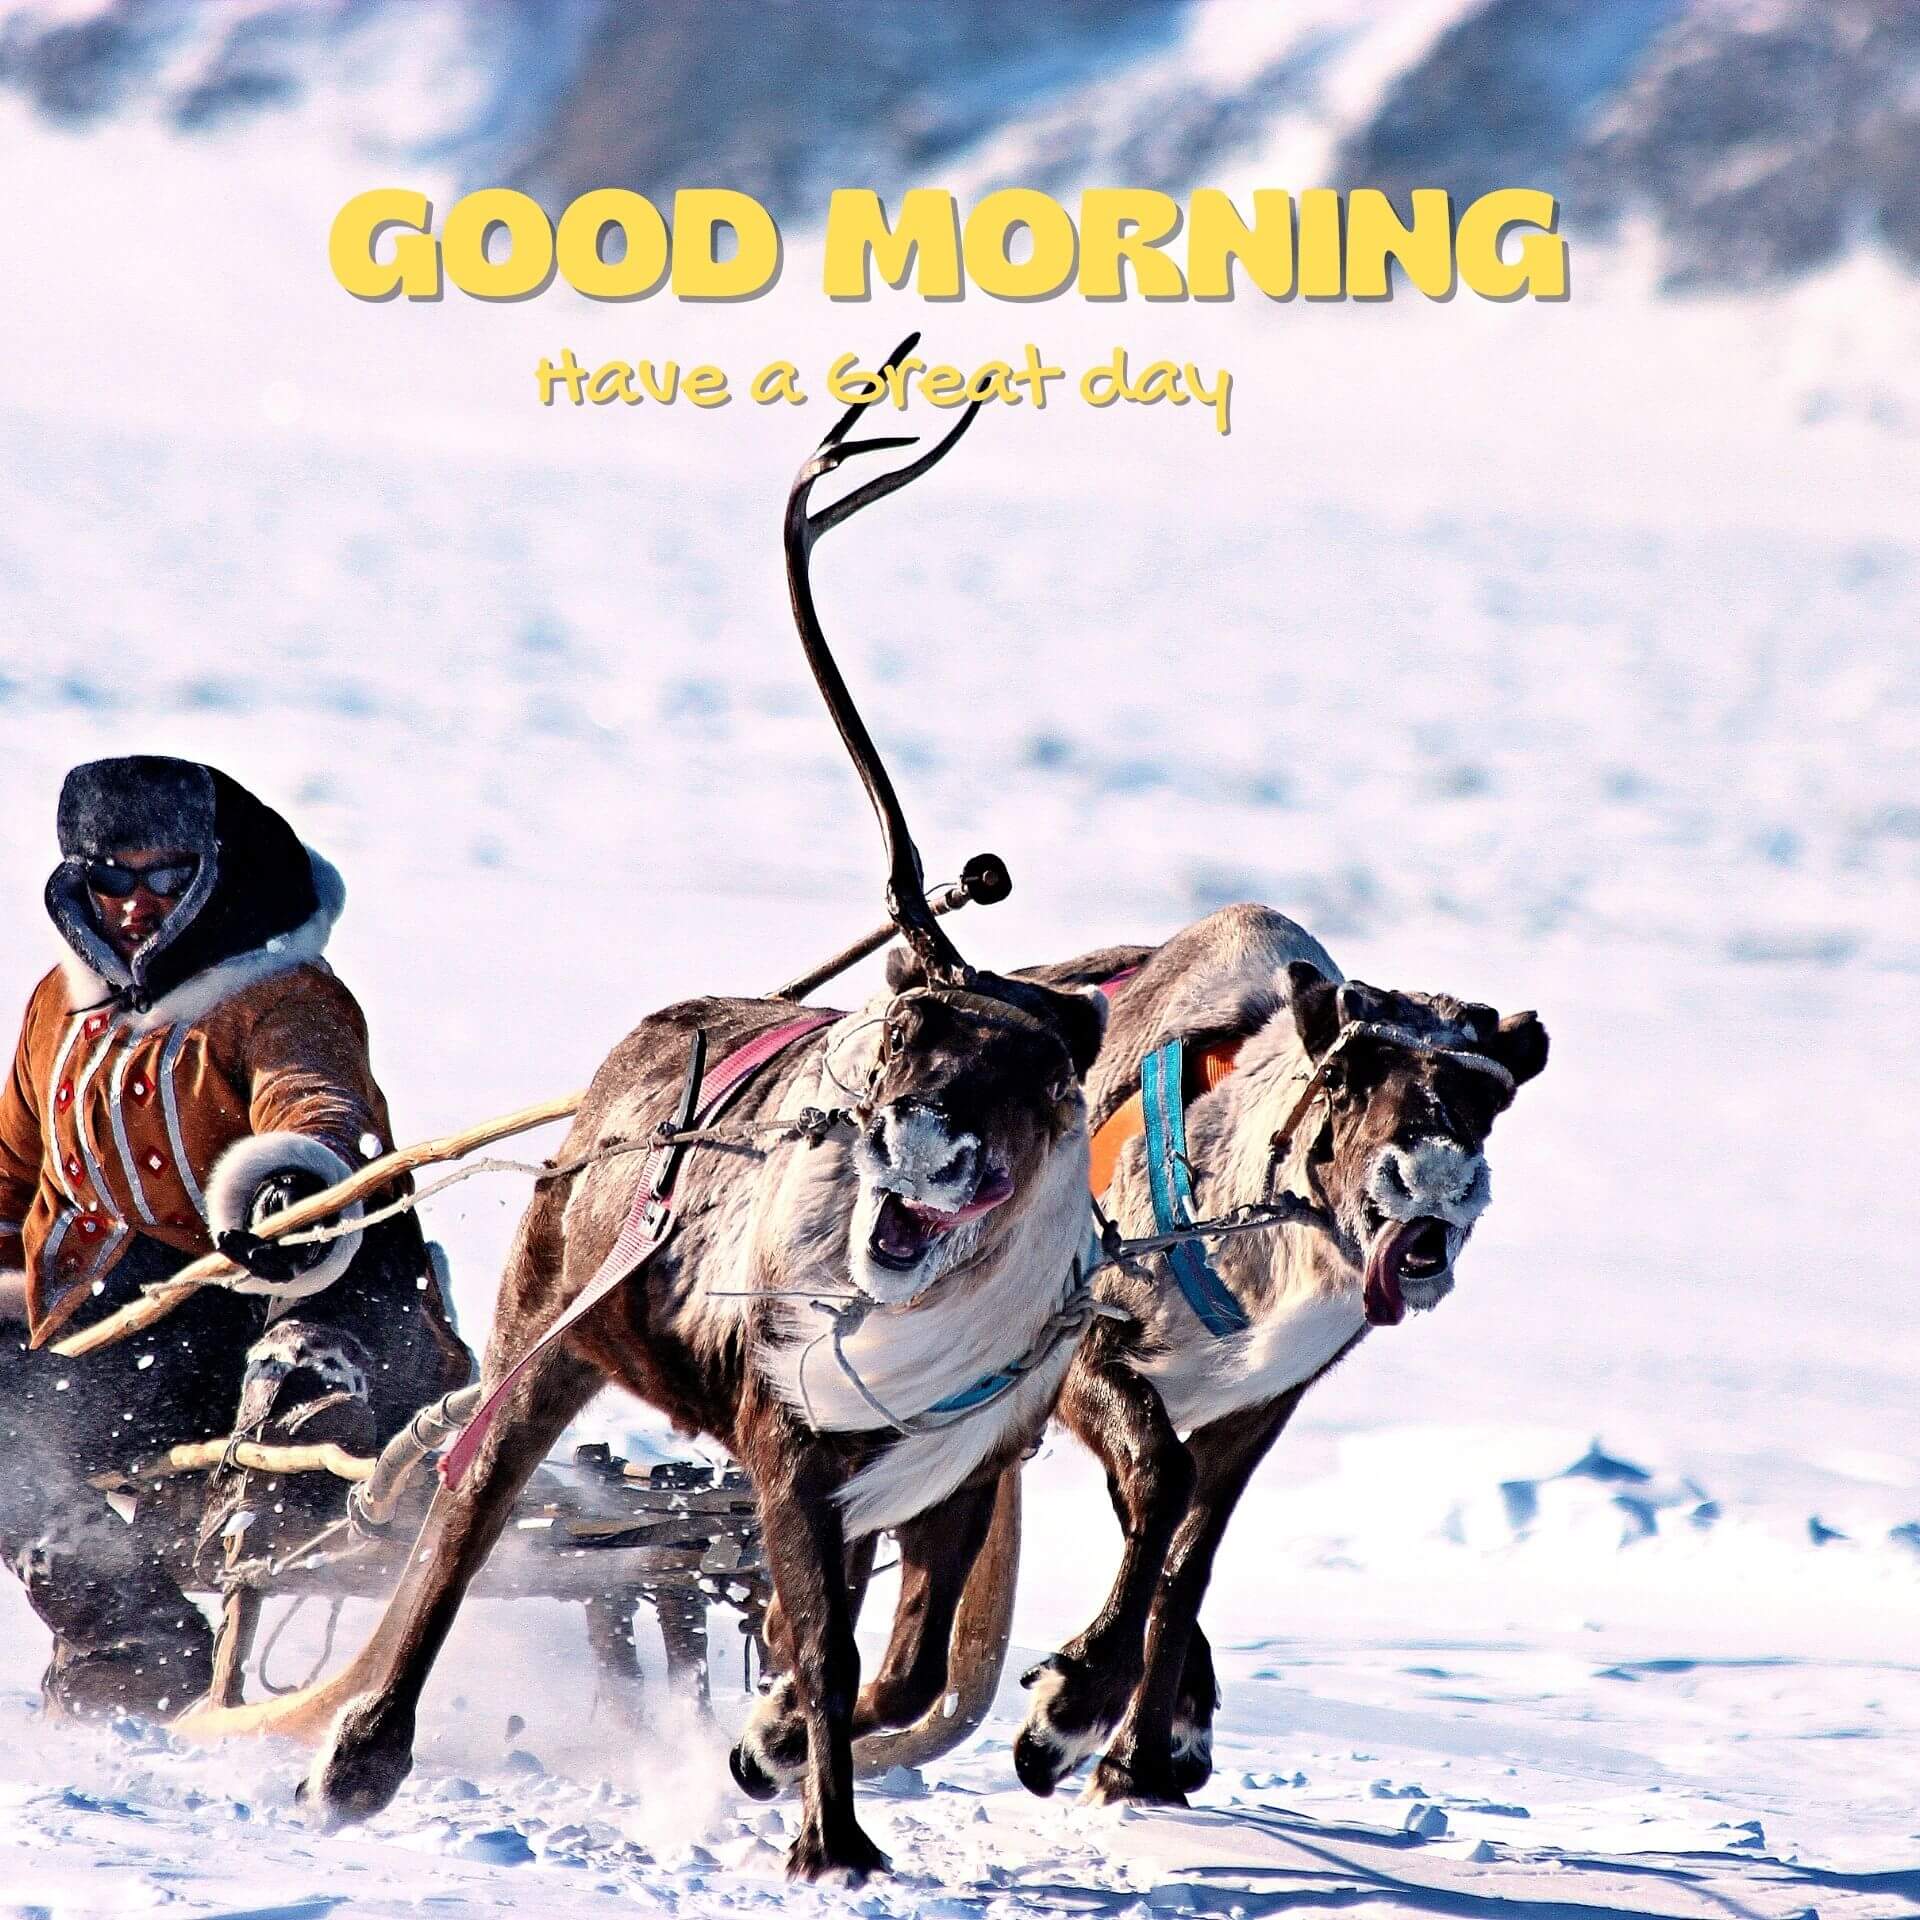 Good morning have a nice day Wallpaper Free Download 2023